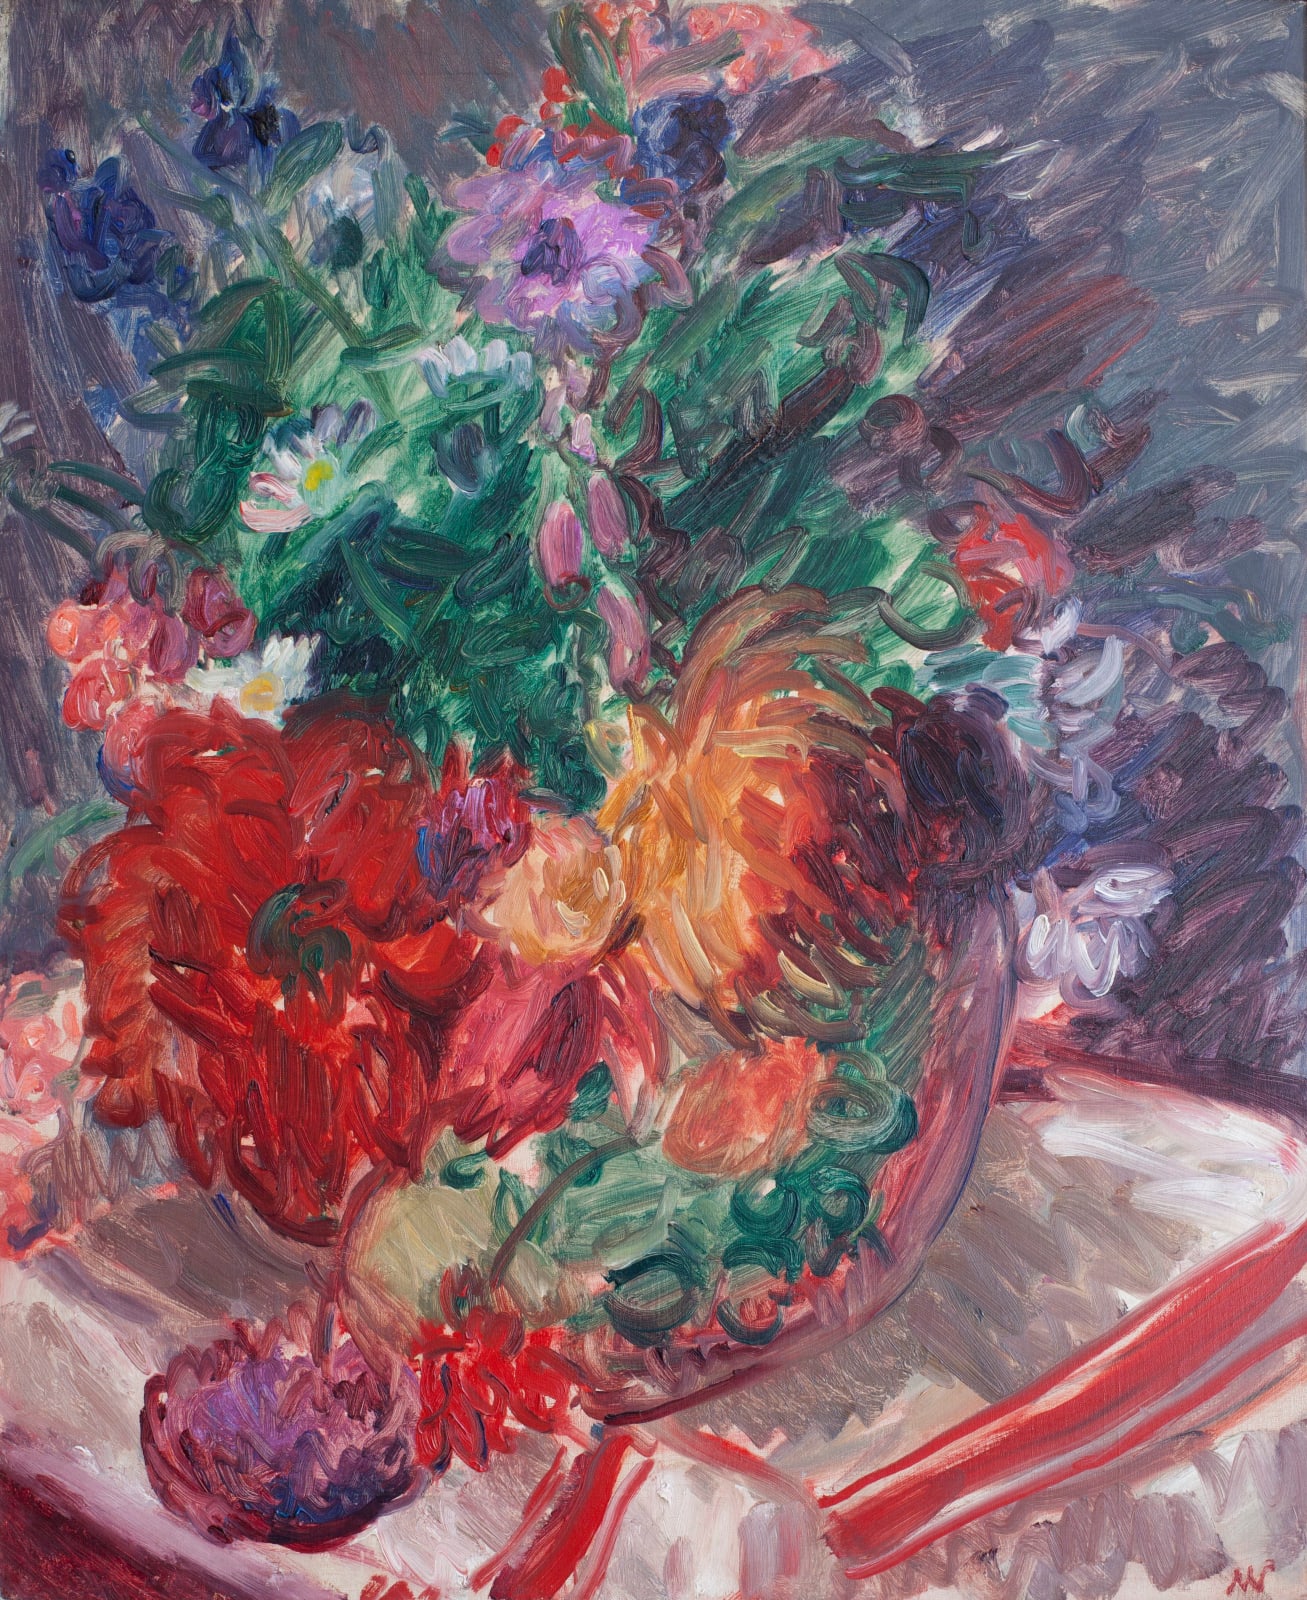 SIR MATTHEW SMITH, Still life with flowers and striped cloth, circa 1931